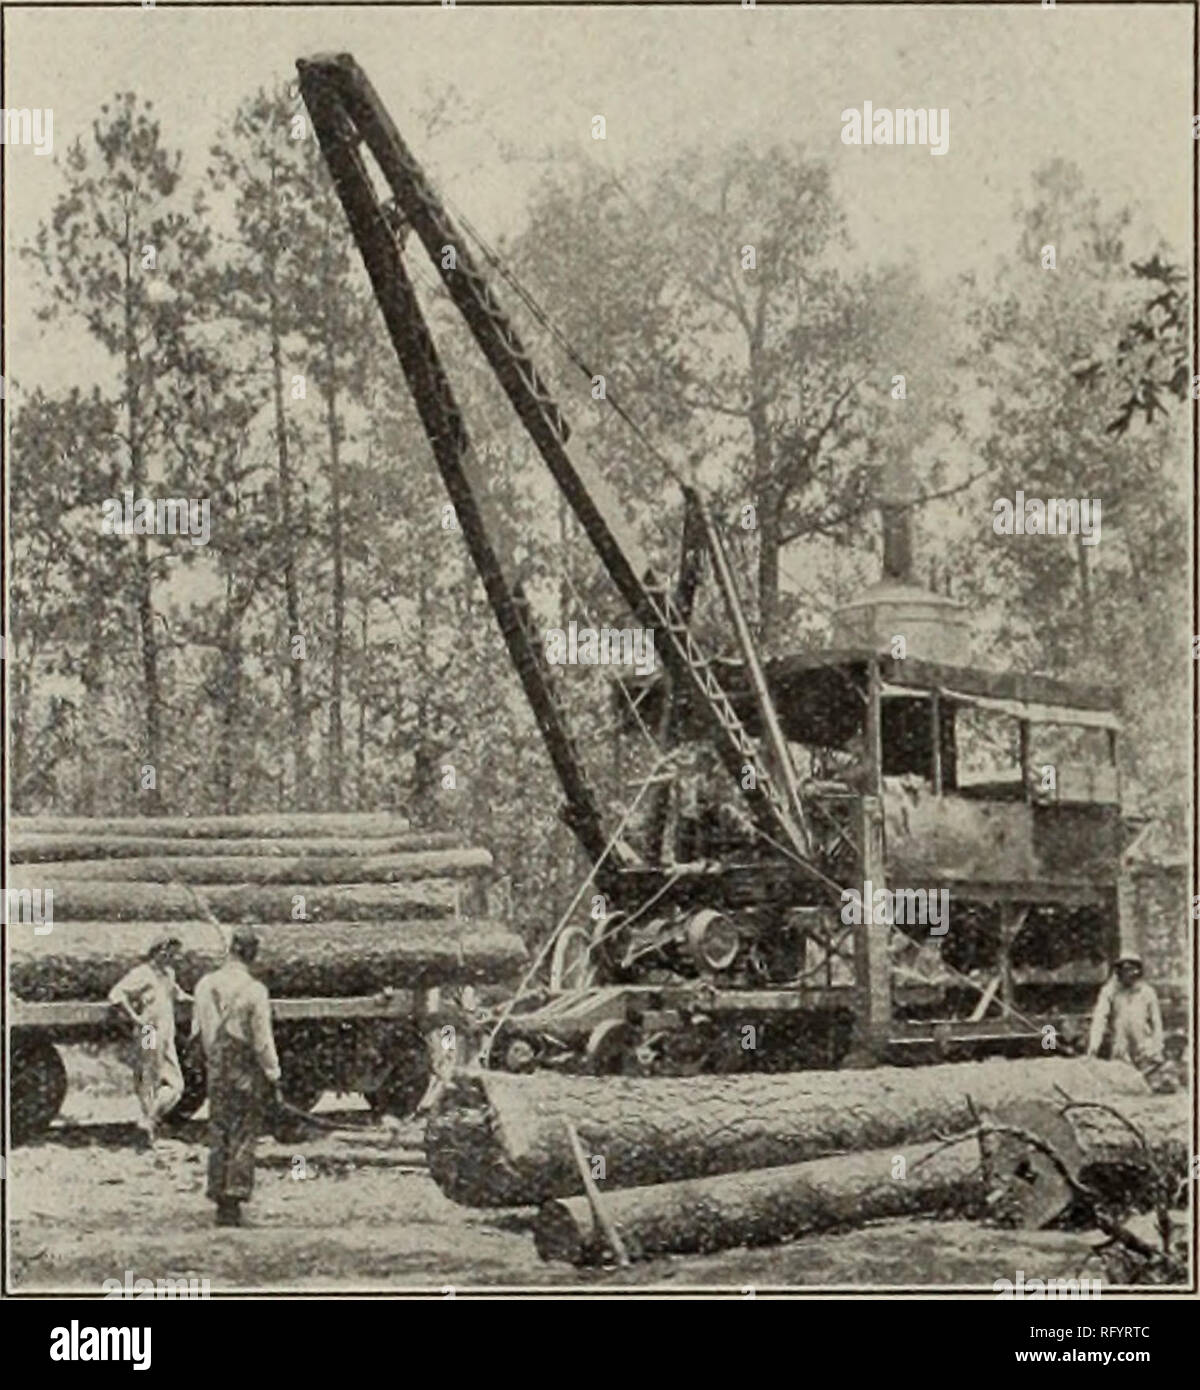 . Canadian forest industries January-June 1912. Lumbering; Forests and forestry; Forest products; Wood-pulp industry; Wood-using industries. &lt;• CANADA LUMBERMAN AND WOODWORKER CURRENT LUMBER PRICES Continued No. 2 Cuts (5/4 45 00 No. 2 Cuts N/4 50 00 No. If Cuts 5/4 33 00 No. .&quot;! Cuts G/4 34 00 No. 3 Cuts 8/4 30 00 Dressing 5/4 46 00 Dressing 5/4 x 10 51 00 Dressing 5/4 x 12 52 00 No. 1 Moulding 5/4 58 00 No. 1 Moulding 0/4 58 00 No. 1 Moulding 8/4 58 00 No. 2 Moulding 5/4 47 00 No. 2 Moulding G/4 47 On No. 2 Moulding 8/4 47 00 No. 1 Barn 1 x 12 40 00 No. 1 Barn 1 x 6 and 8 34 00 No. 1 Stock Photo